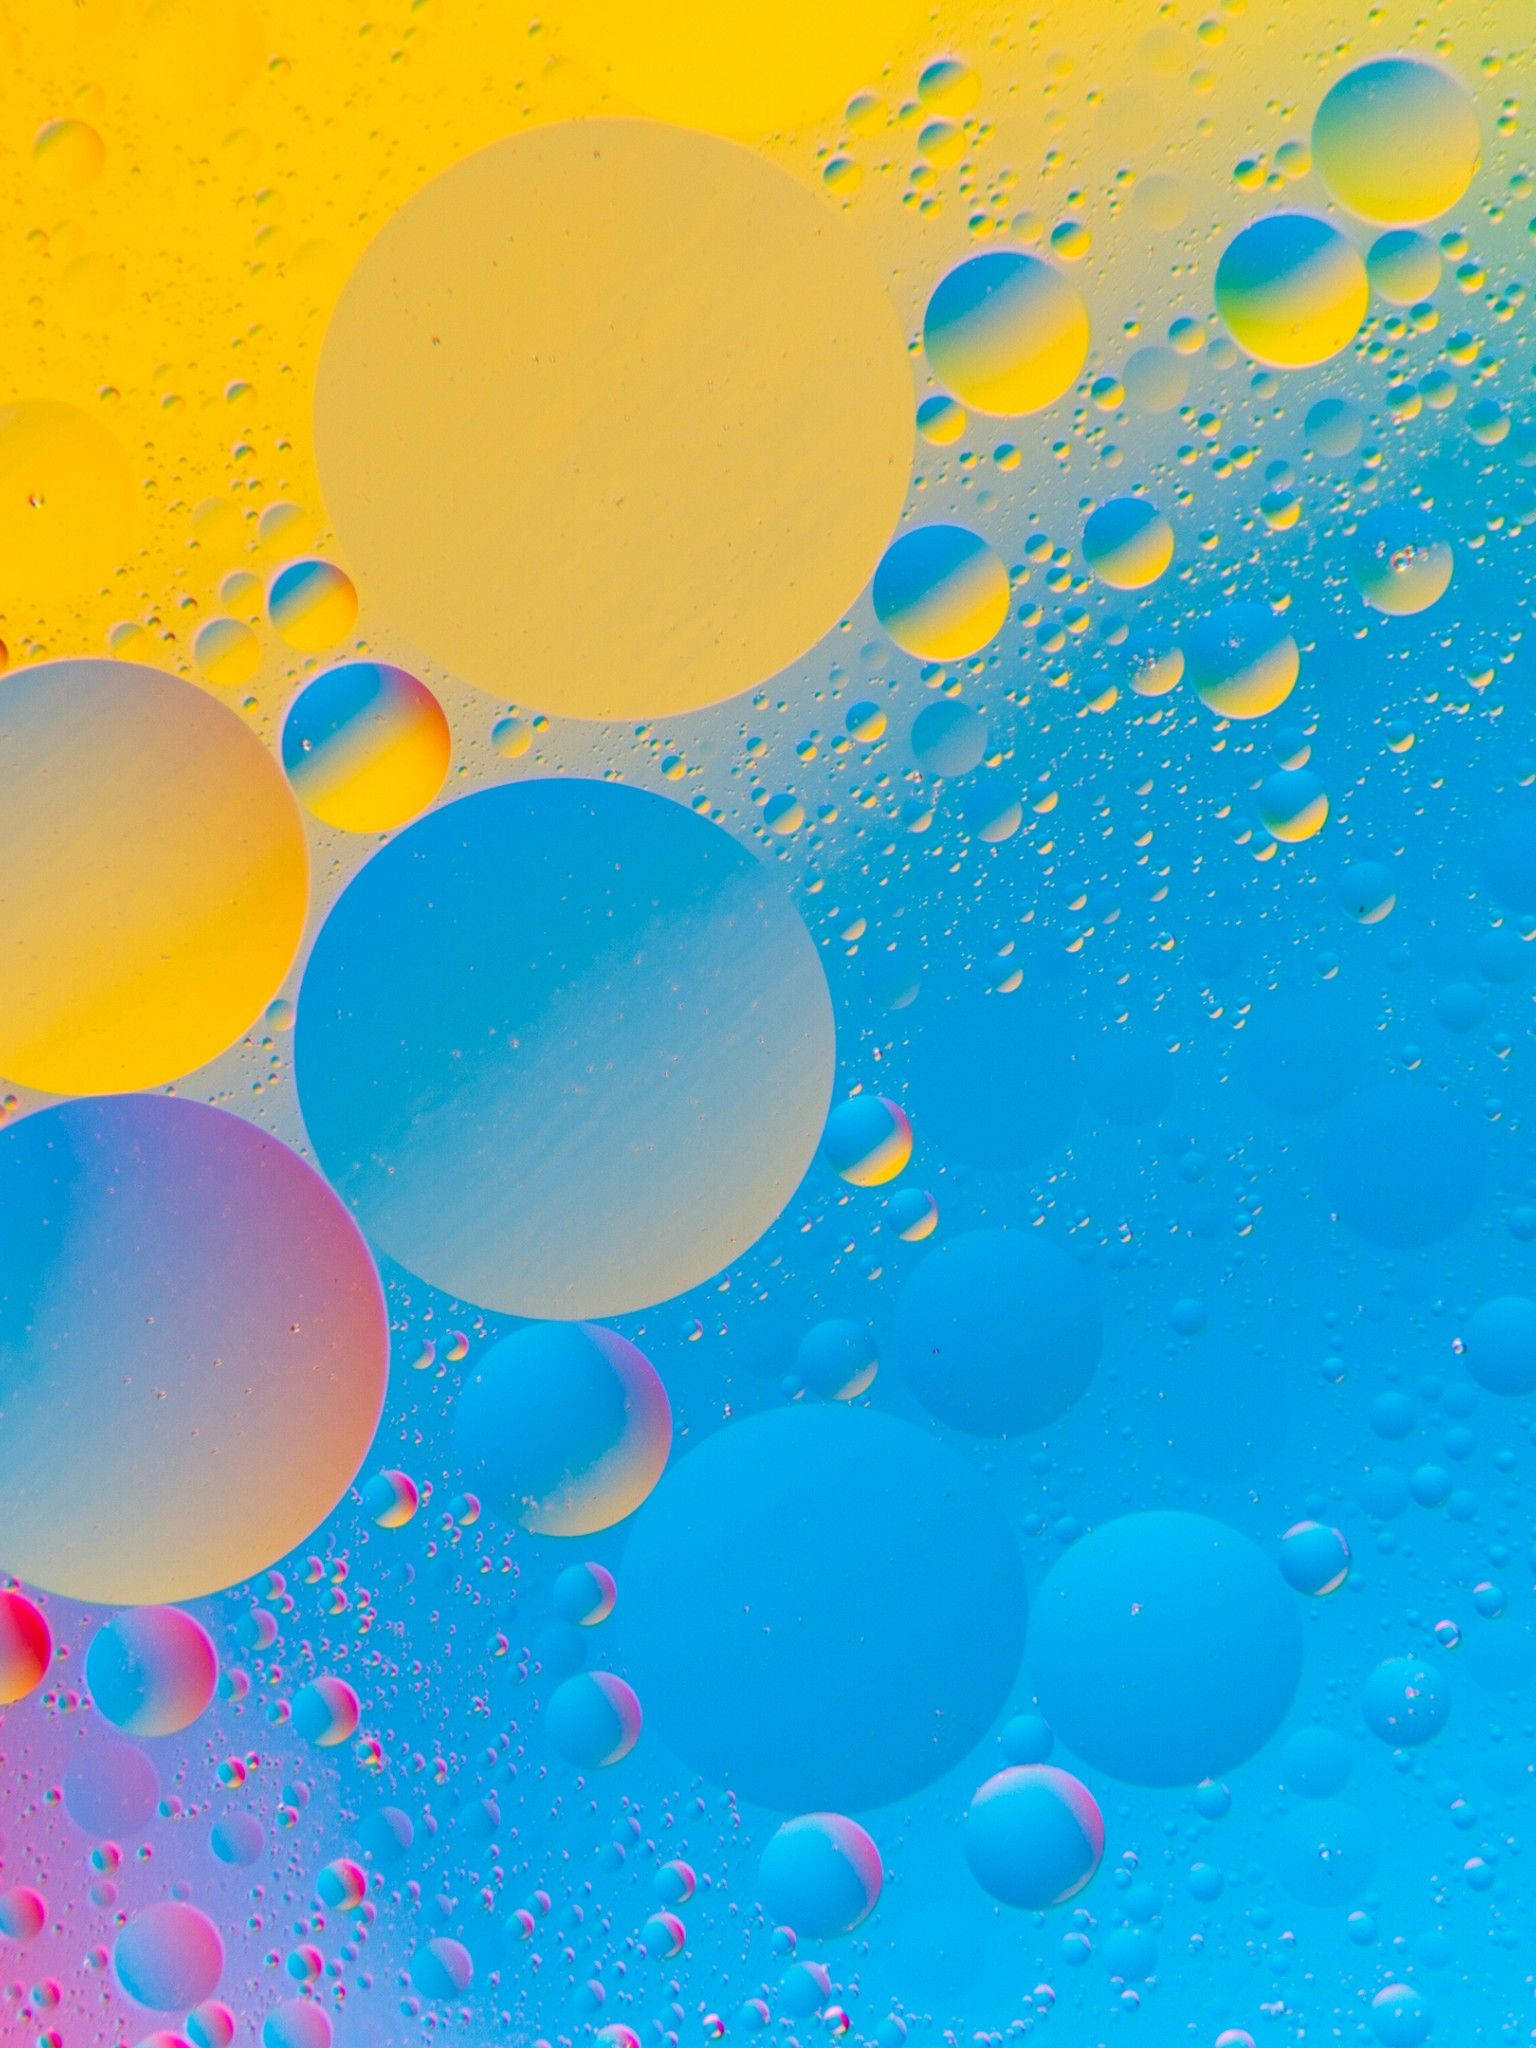 Colored Bubbles As Official Ipad Display Background